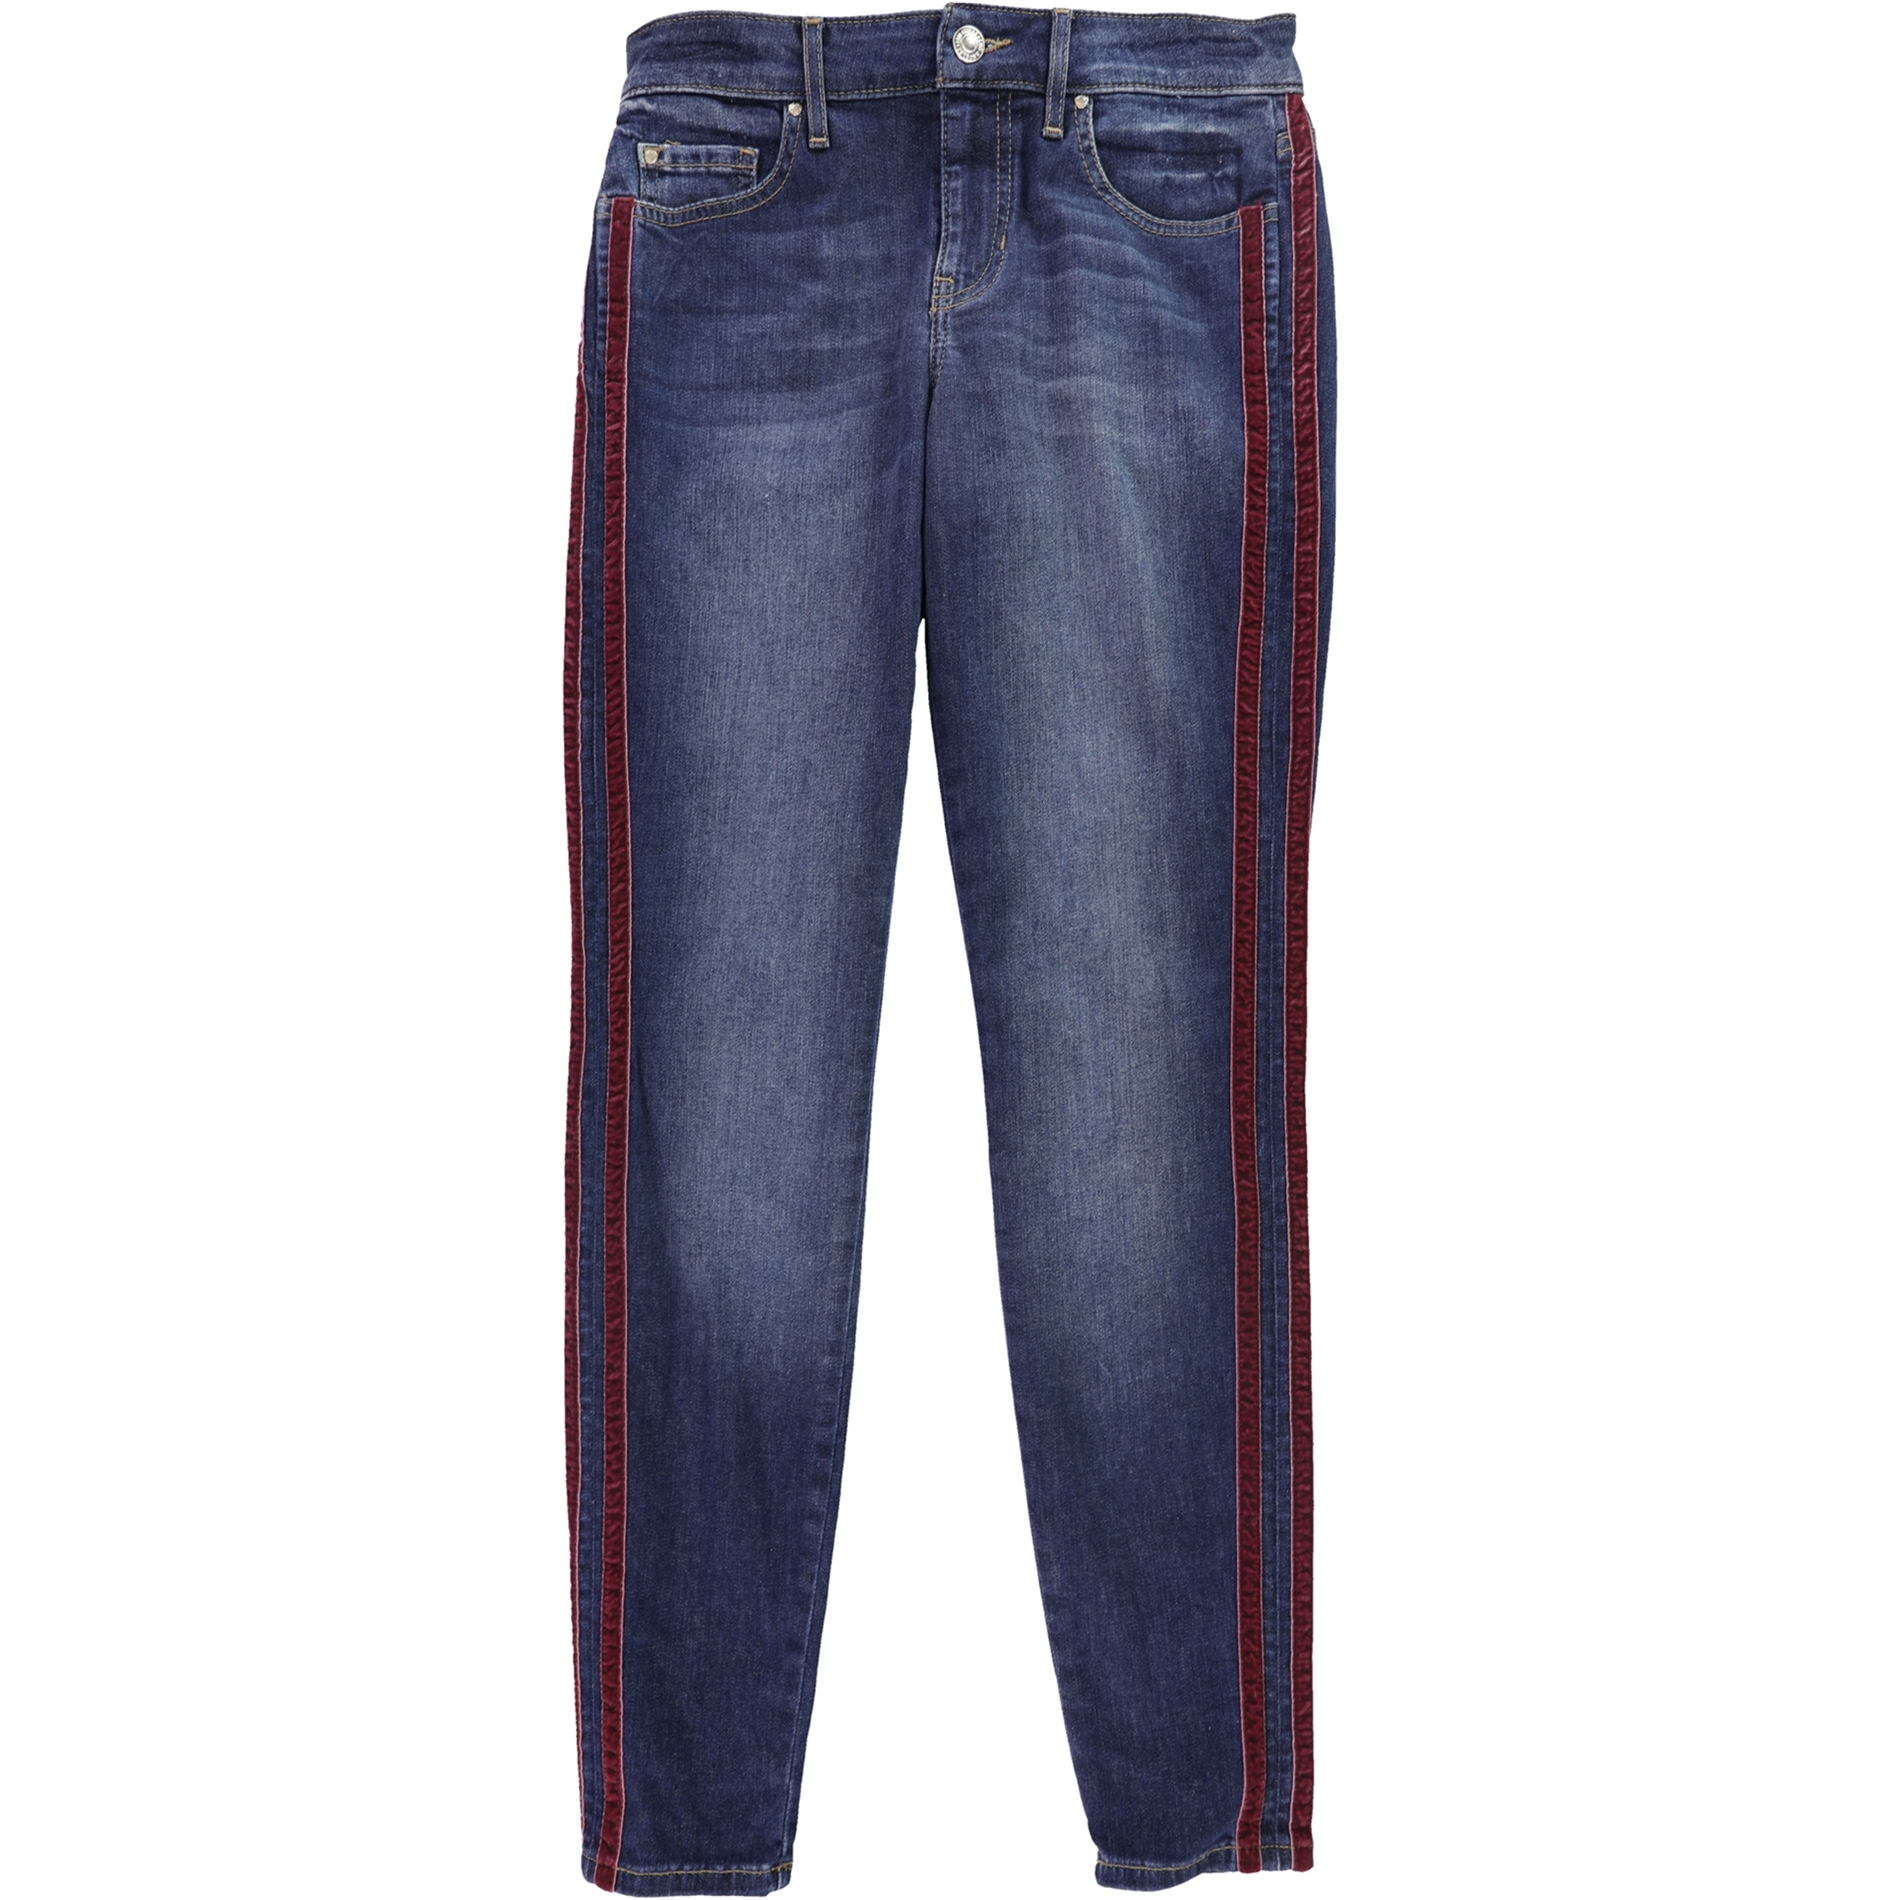 Guess Womens Stripe Skinny Fit Jeans